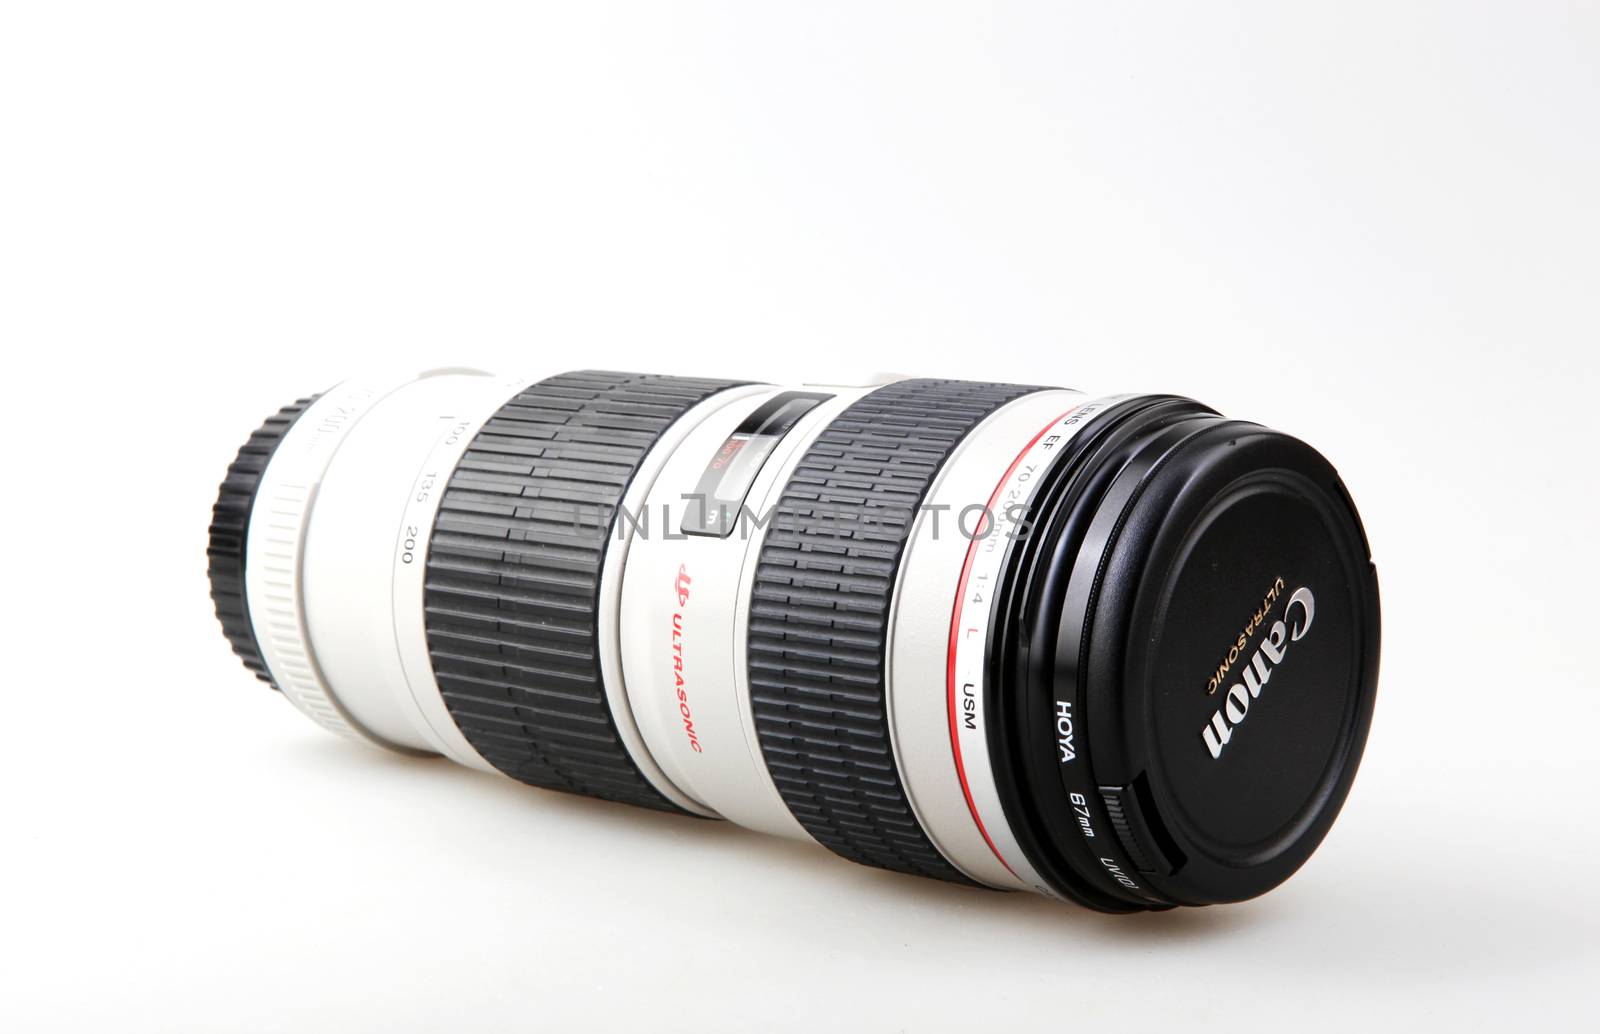 Pomorie, Bulgaria - March 01, 2019: Canon EF 70-200mm f/4L USM Lens. Canon Inc. Is A Japanese Multinational Corporation Specialized In The Manufacture Of Imaging And Optical Products. 